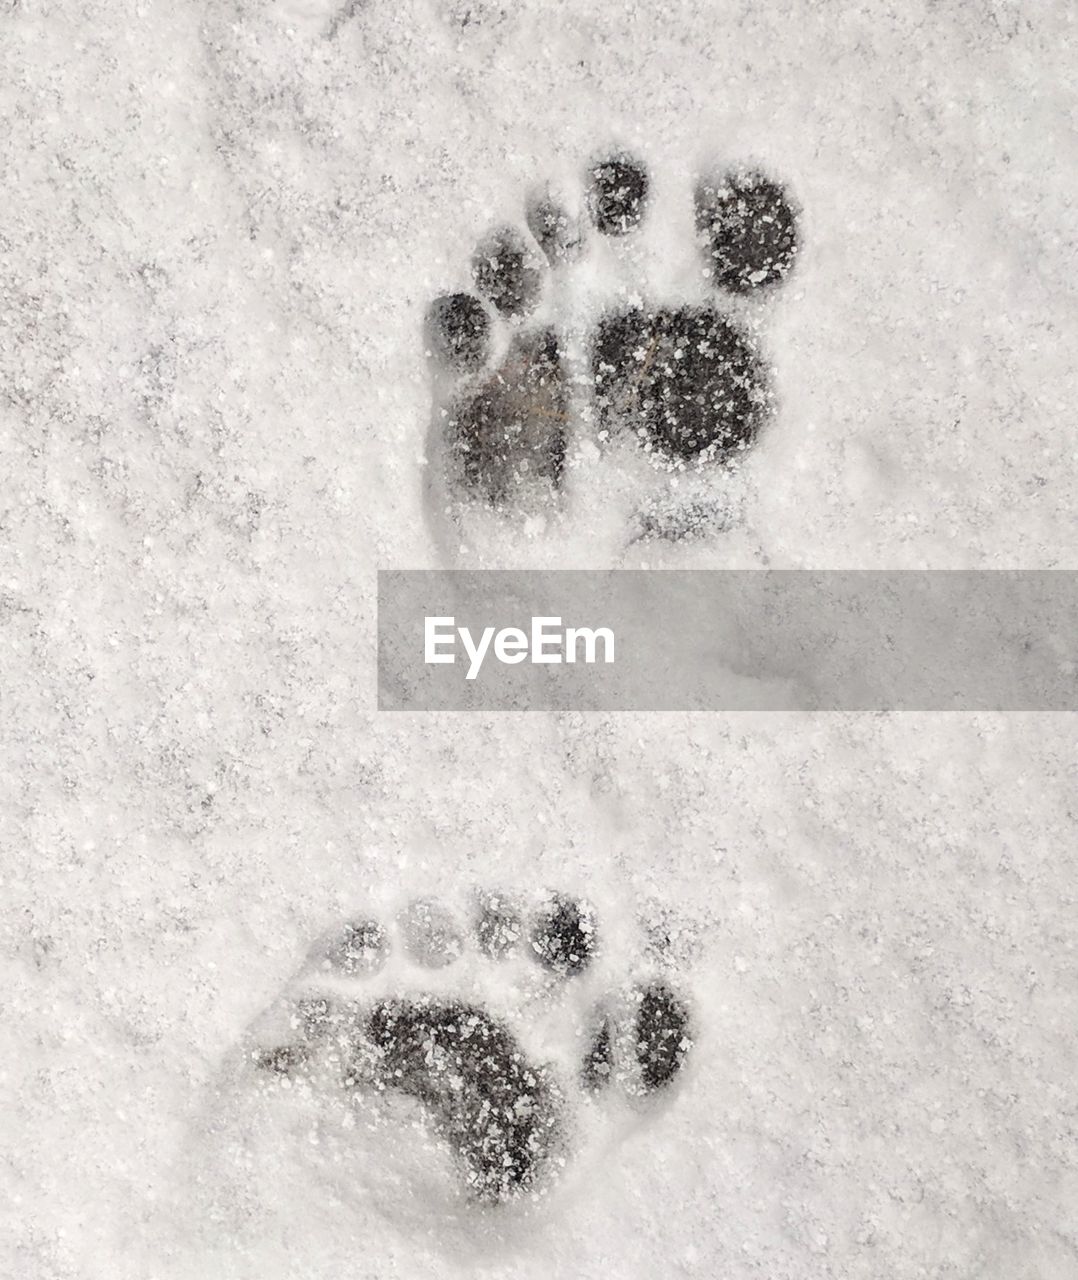 CLOSE-UP OF FOOTPRINTS ON SNOW